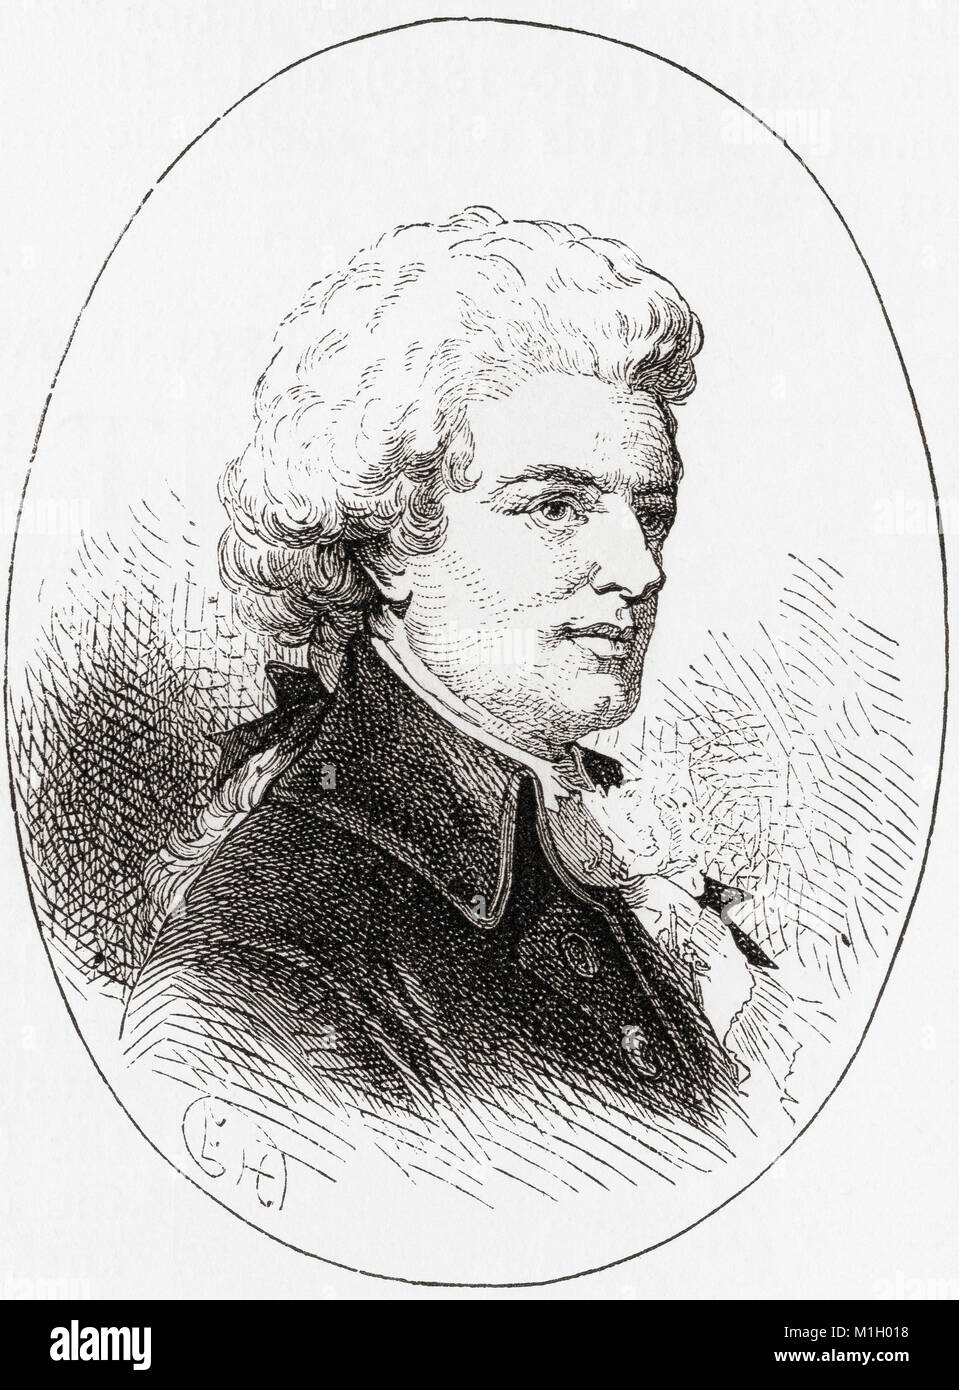 Wolfgang Amadeus Mozart, 1756 –1791, baptised as Johannes Chrysostomus Wolfgangus Theophilus Mozart. Prolific and influential composer of the Classical era.  From Ward and Lock's Illustrated History of the World, published c.1882. Stock Photo